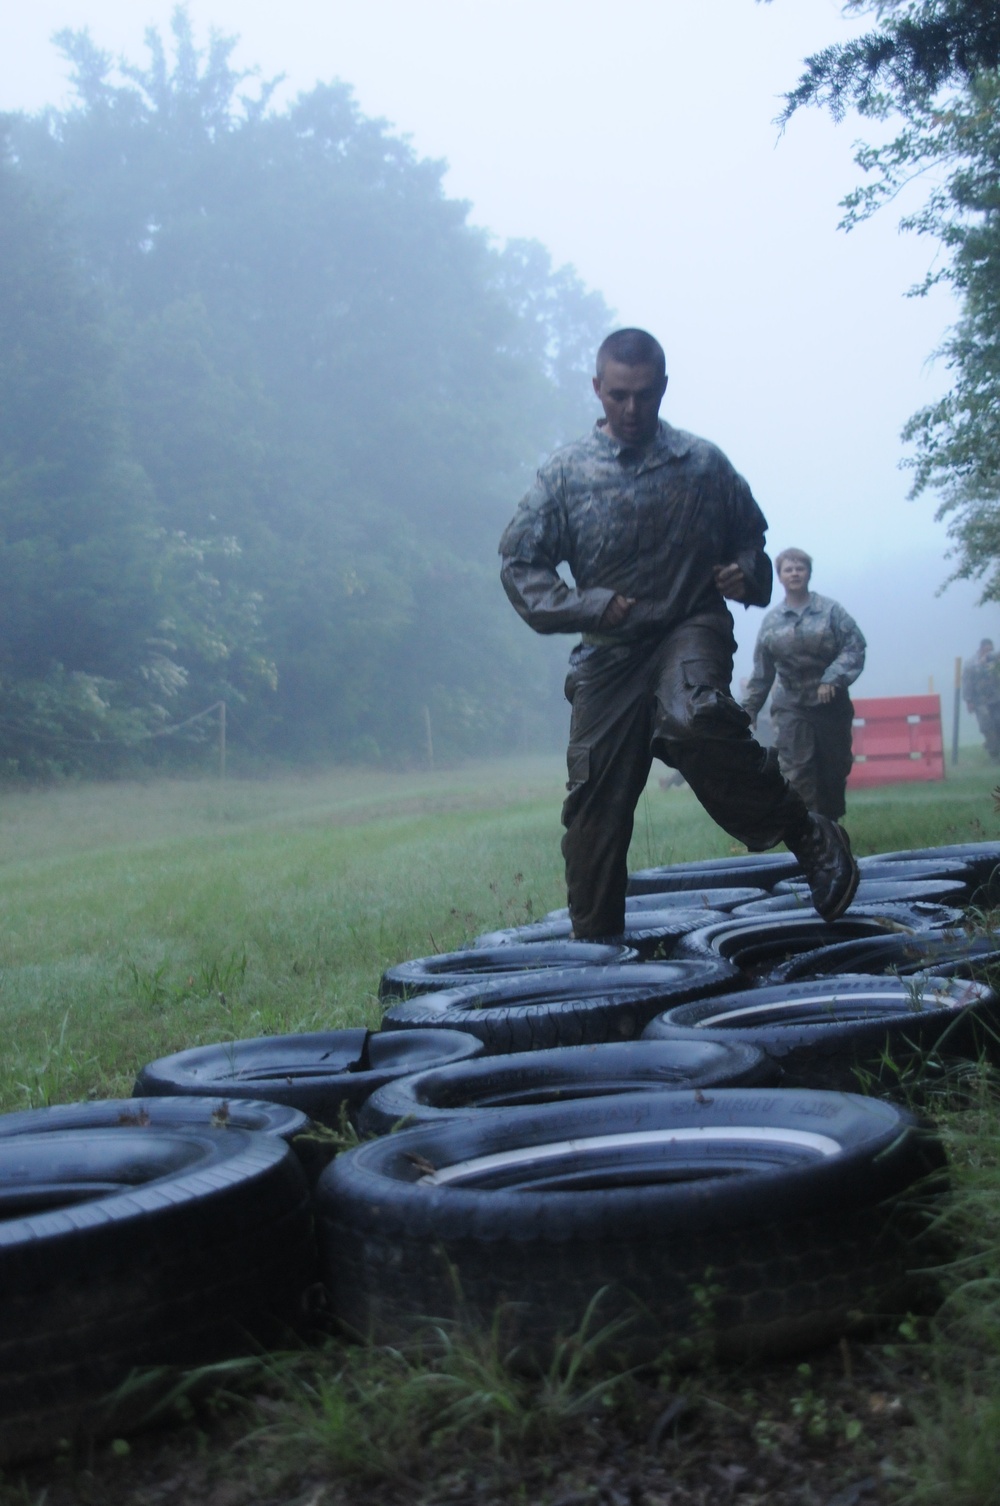 Getting muddy and building a team: Soldiers take on obstacle course at annual training